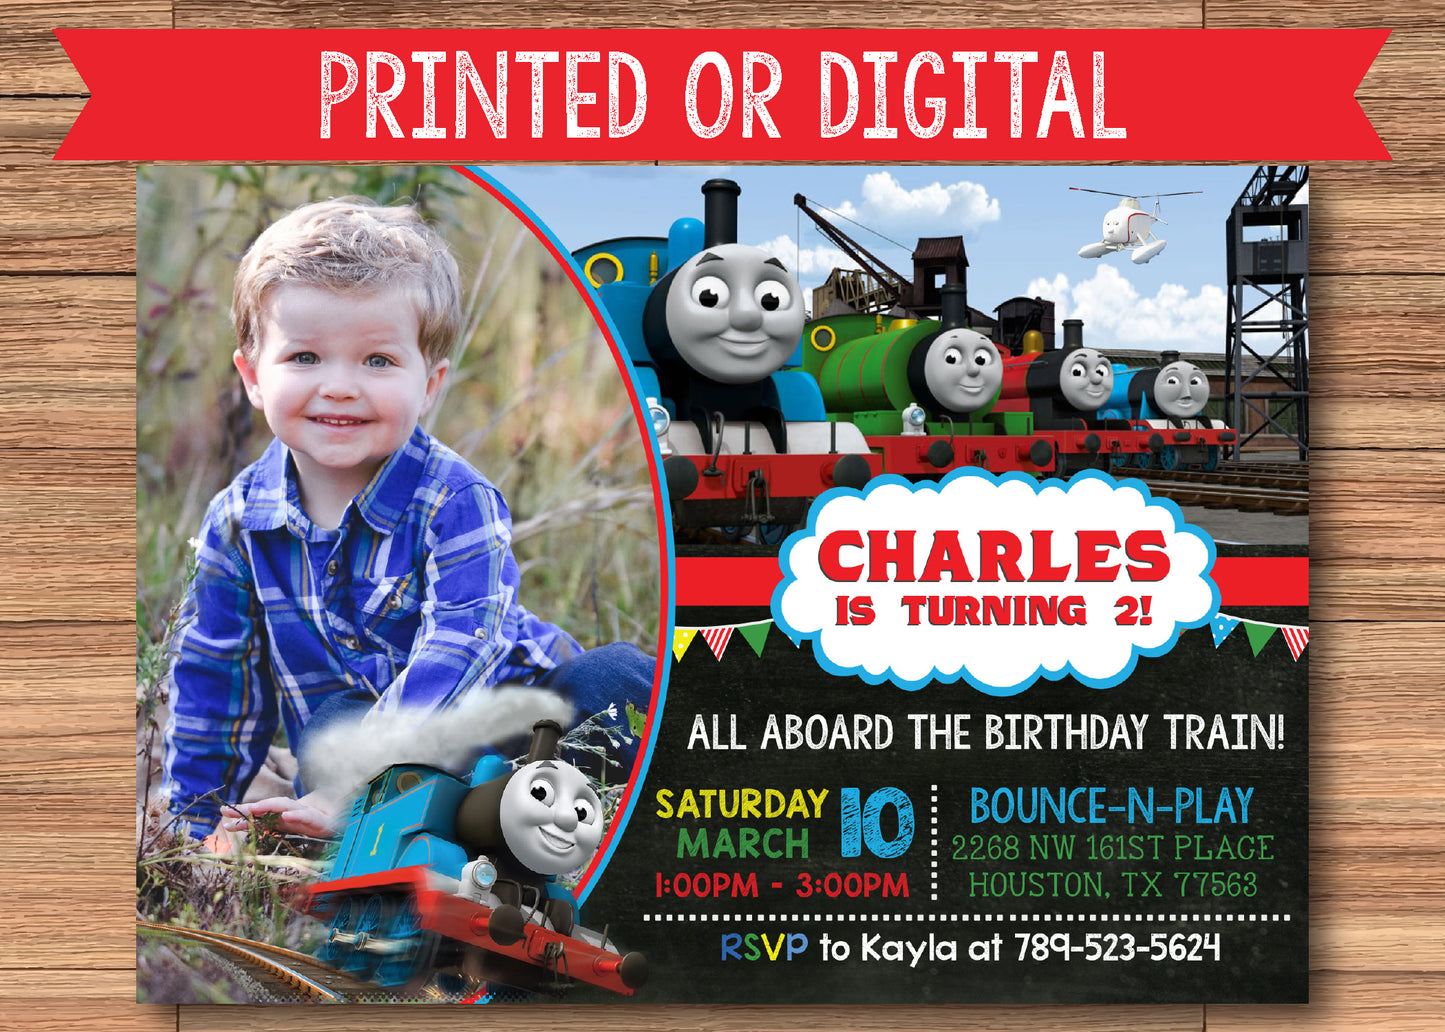 Printed or Digital THOMAS THE TRAIN Birthday Party Invitation with or without Photo!